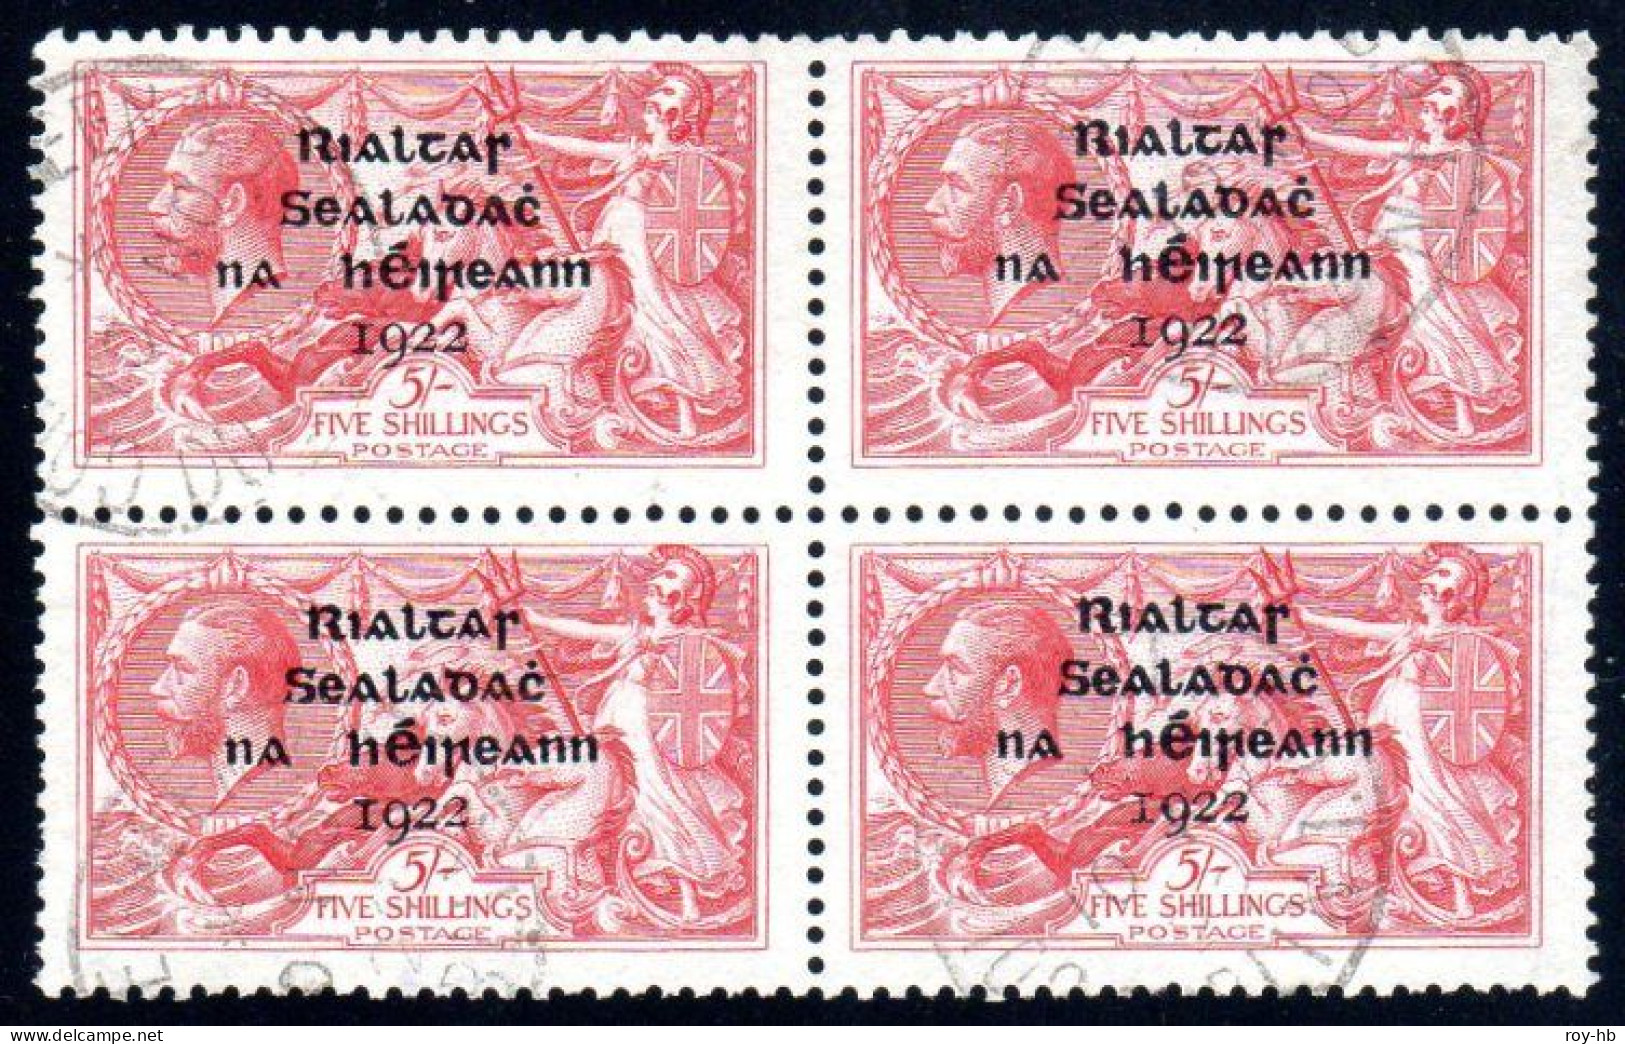 1922 Thom "Rialtas" Set 2/6 To 10/- In Cds Used Blocks Of 4, Each With Clear, Contemporary Cds's On Each Stamp - Oblitérés